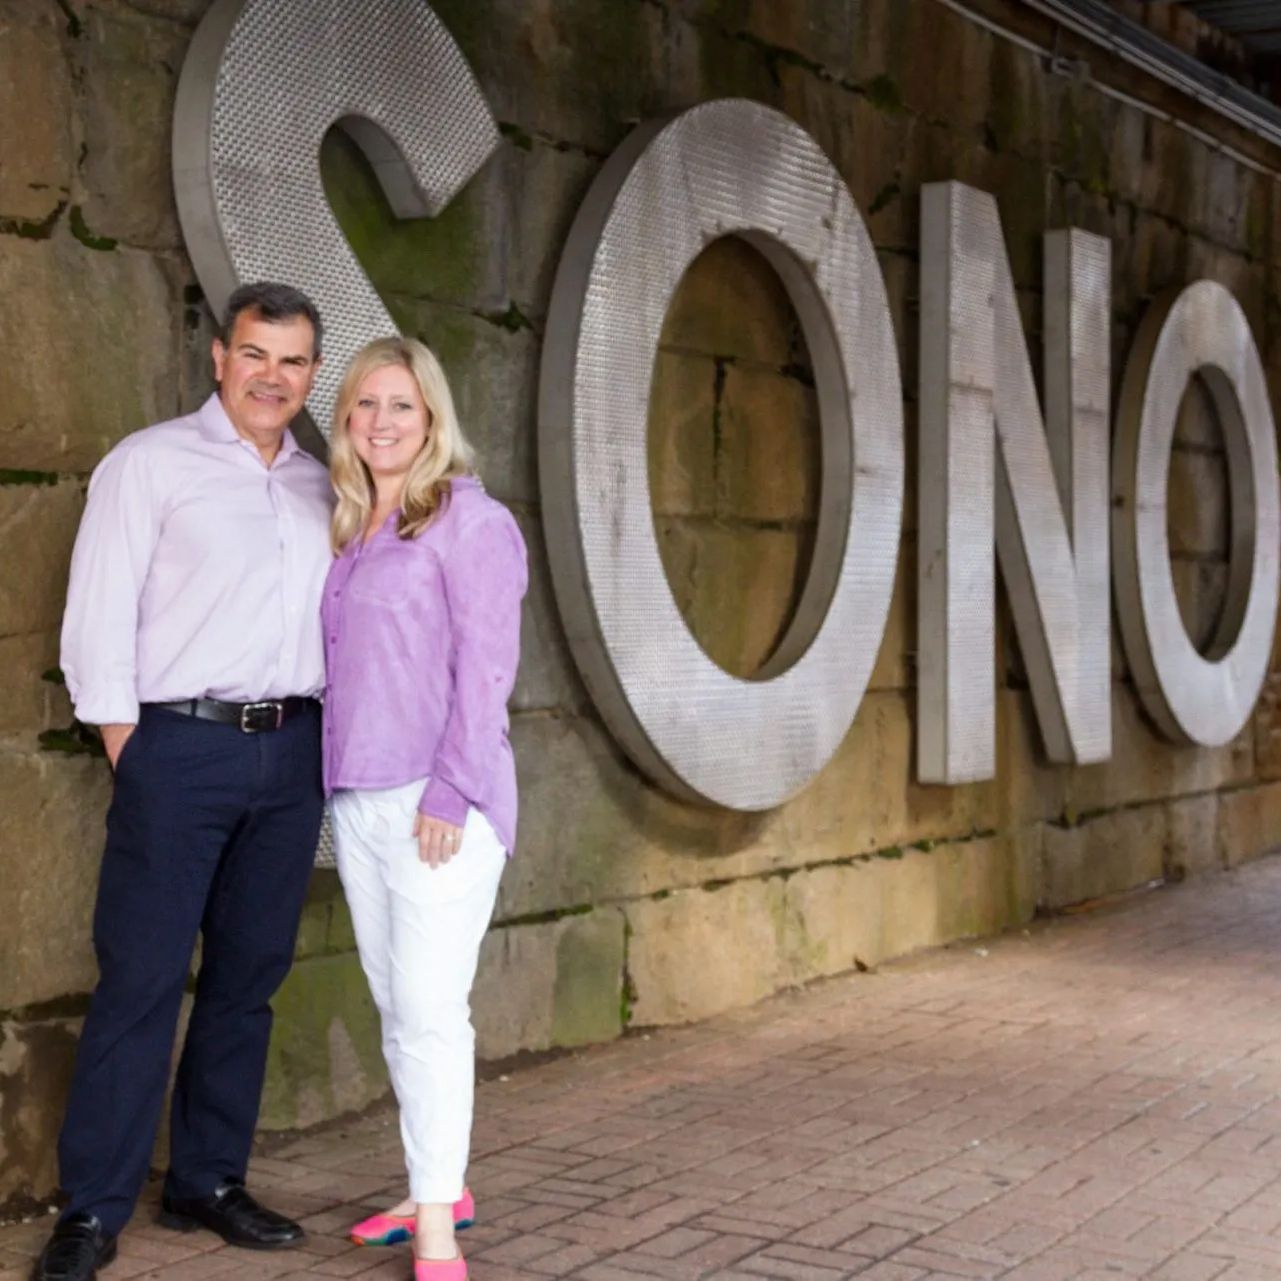 A man and a woman are standing in front of a large sign that says sono.